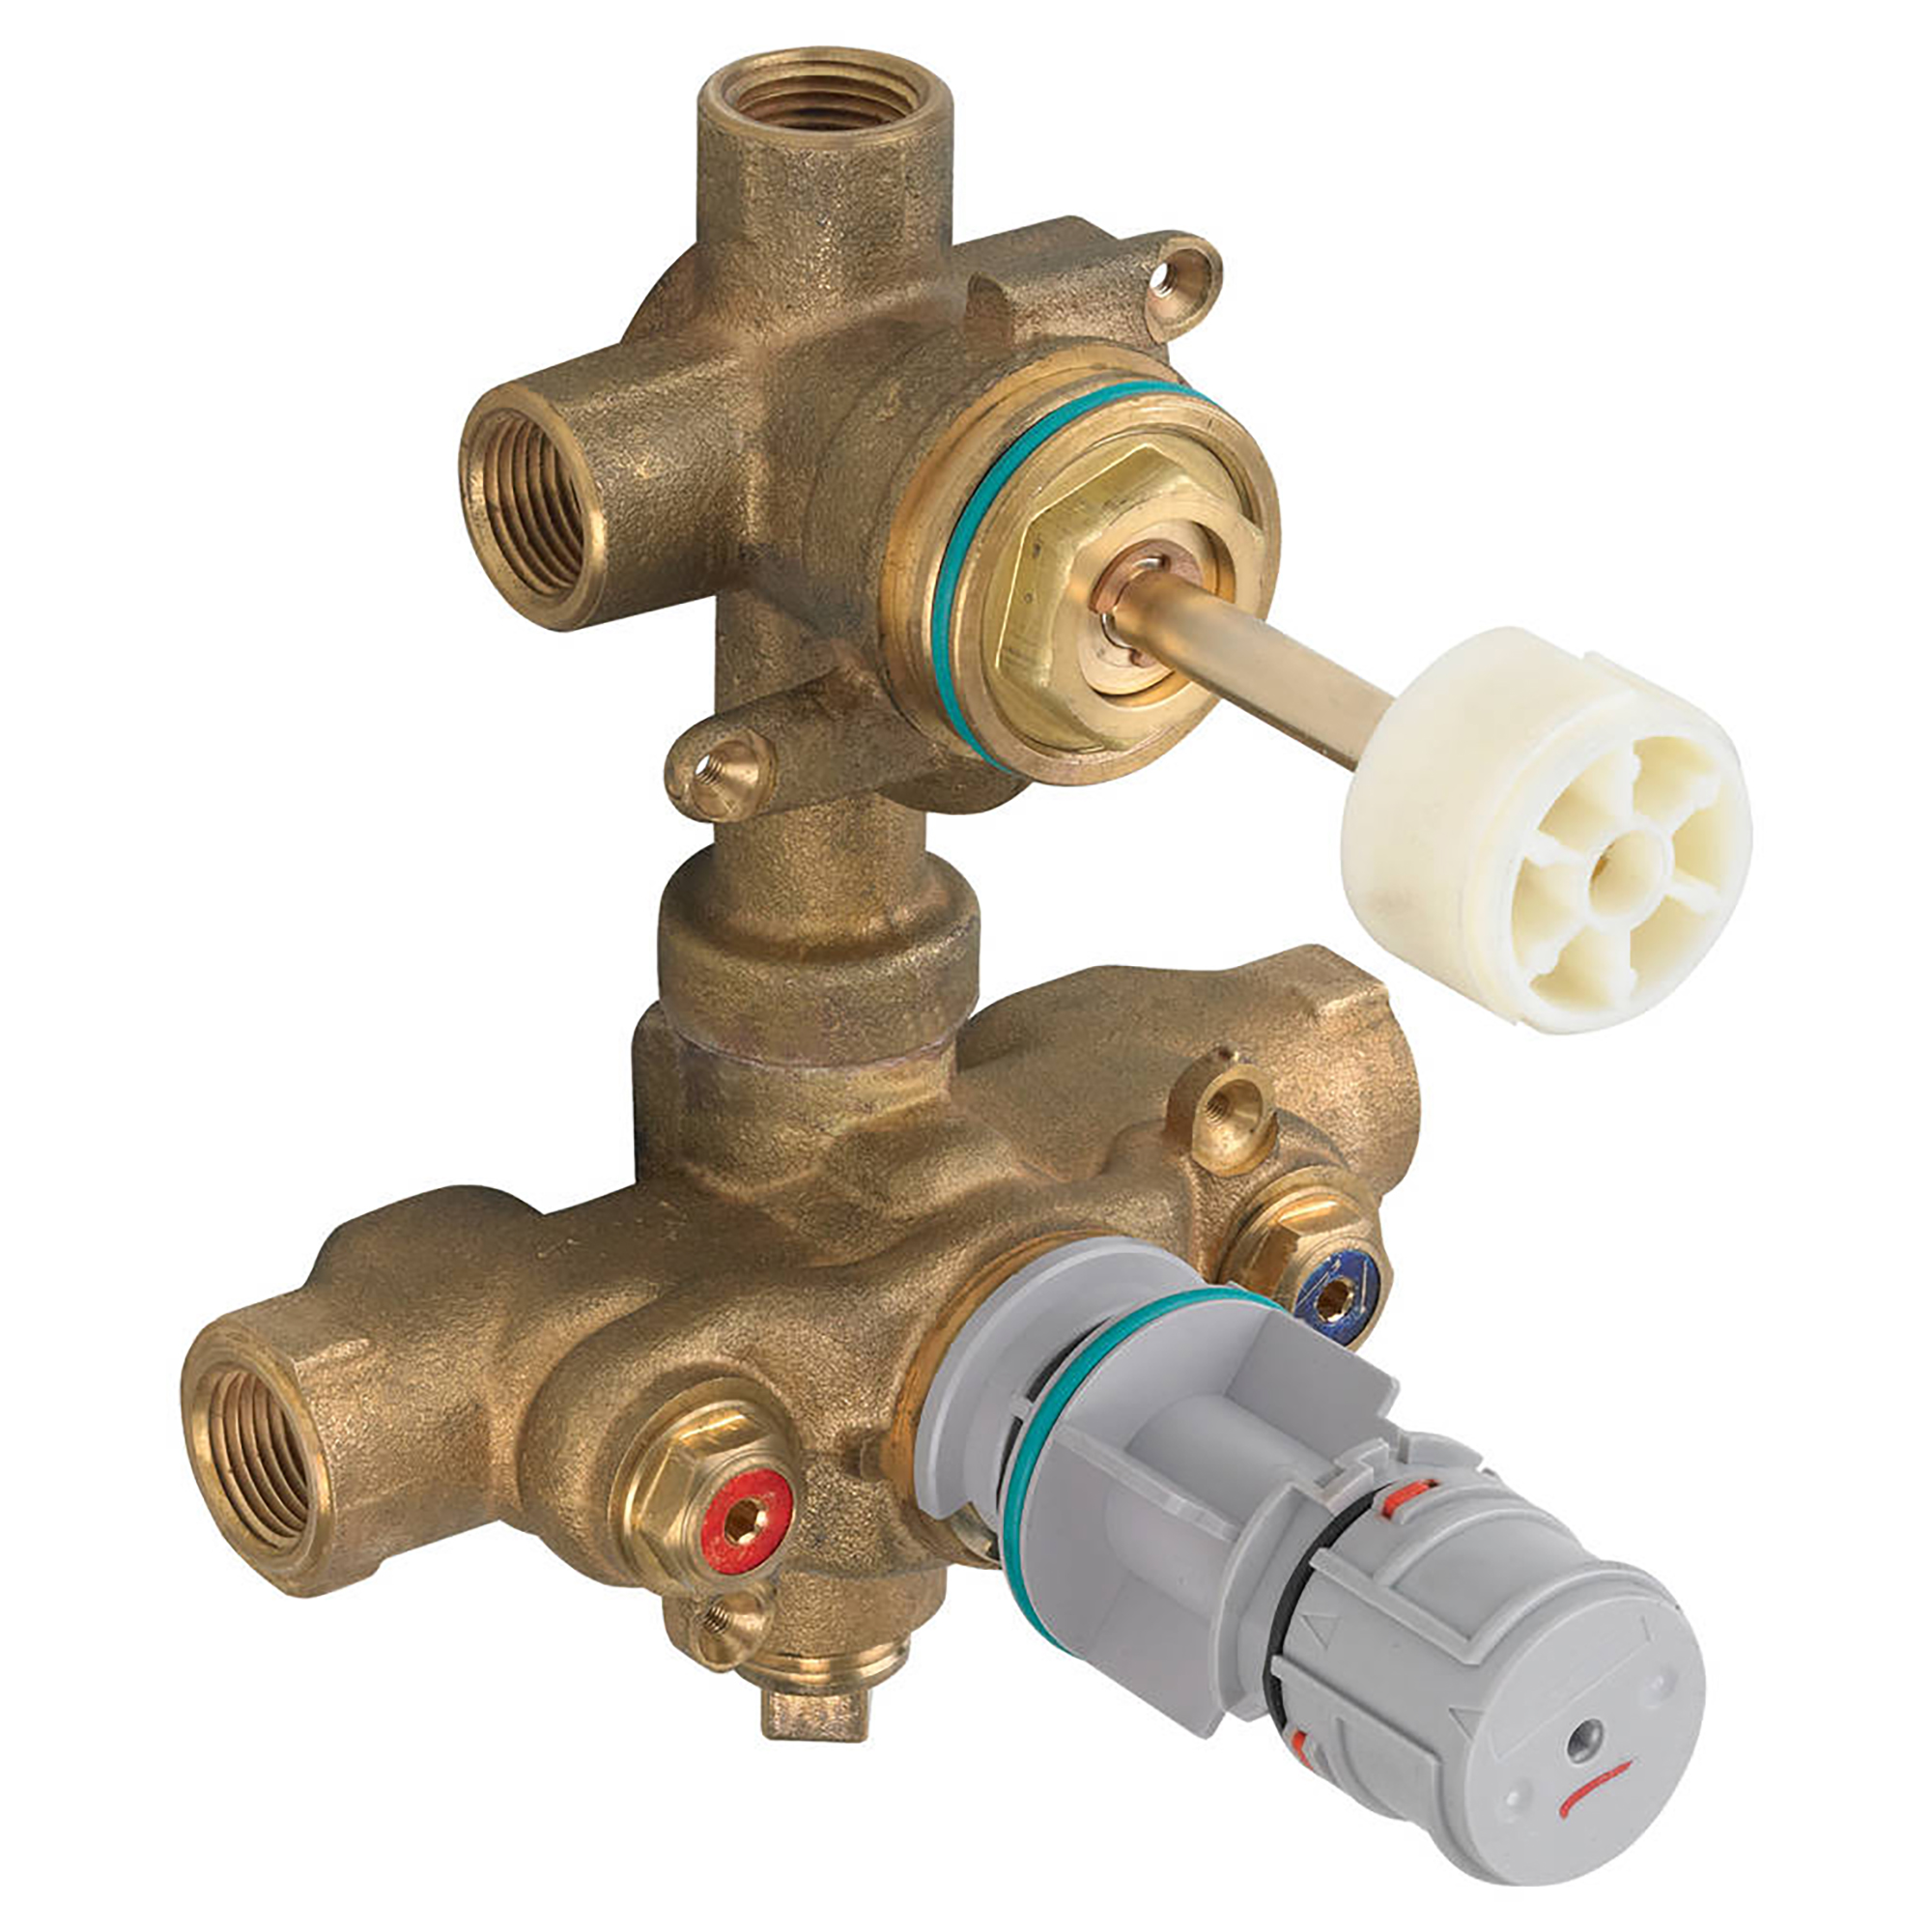 2-Hdl Thermo Rgh Valve W/3Way Div-Shared